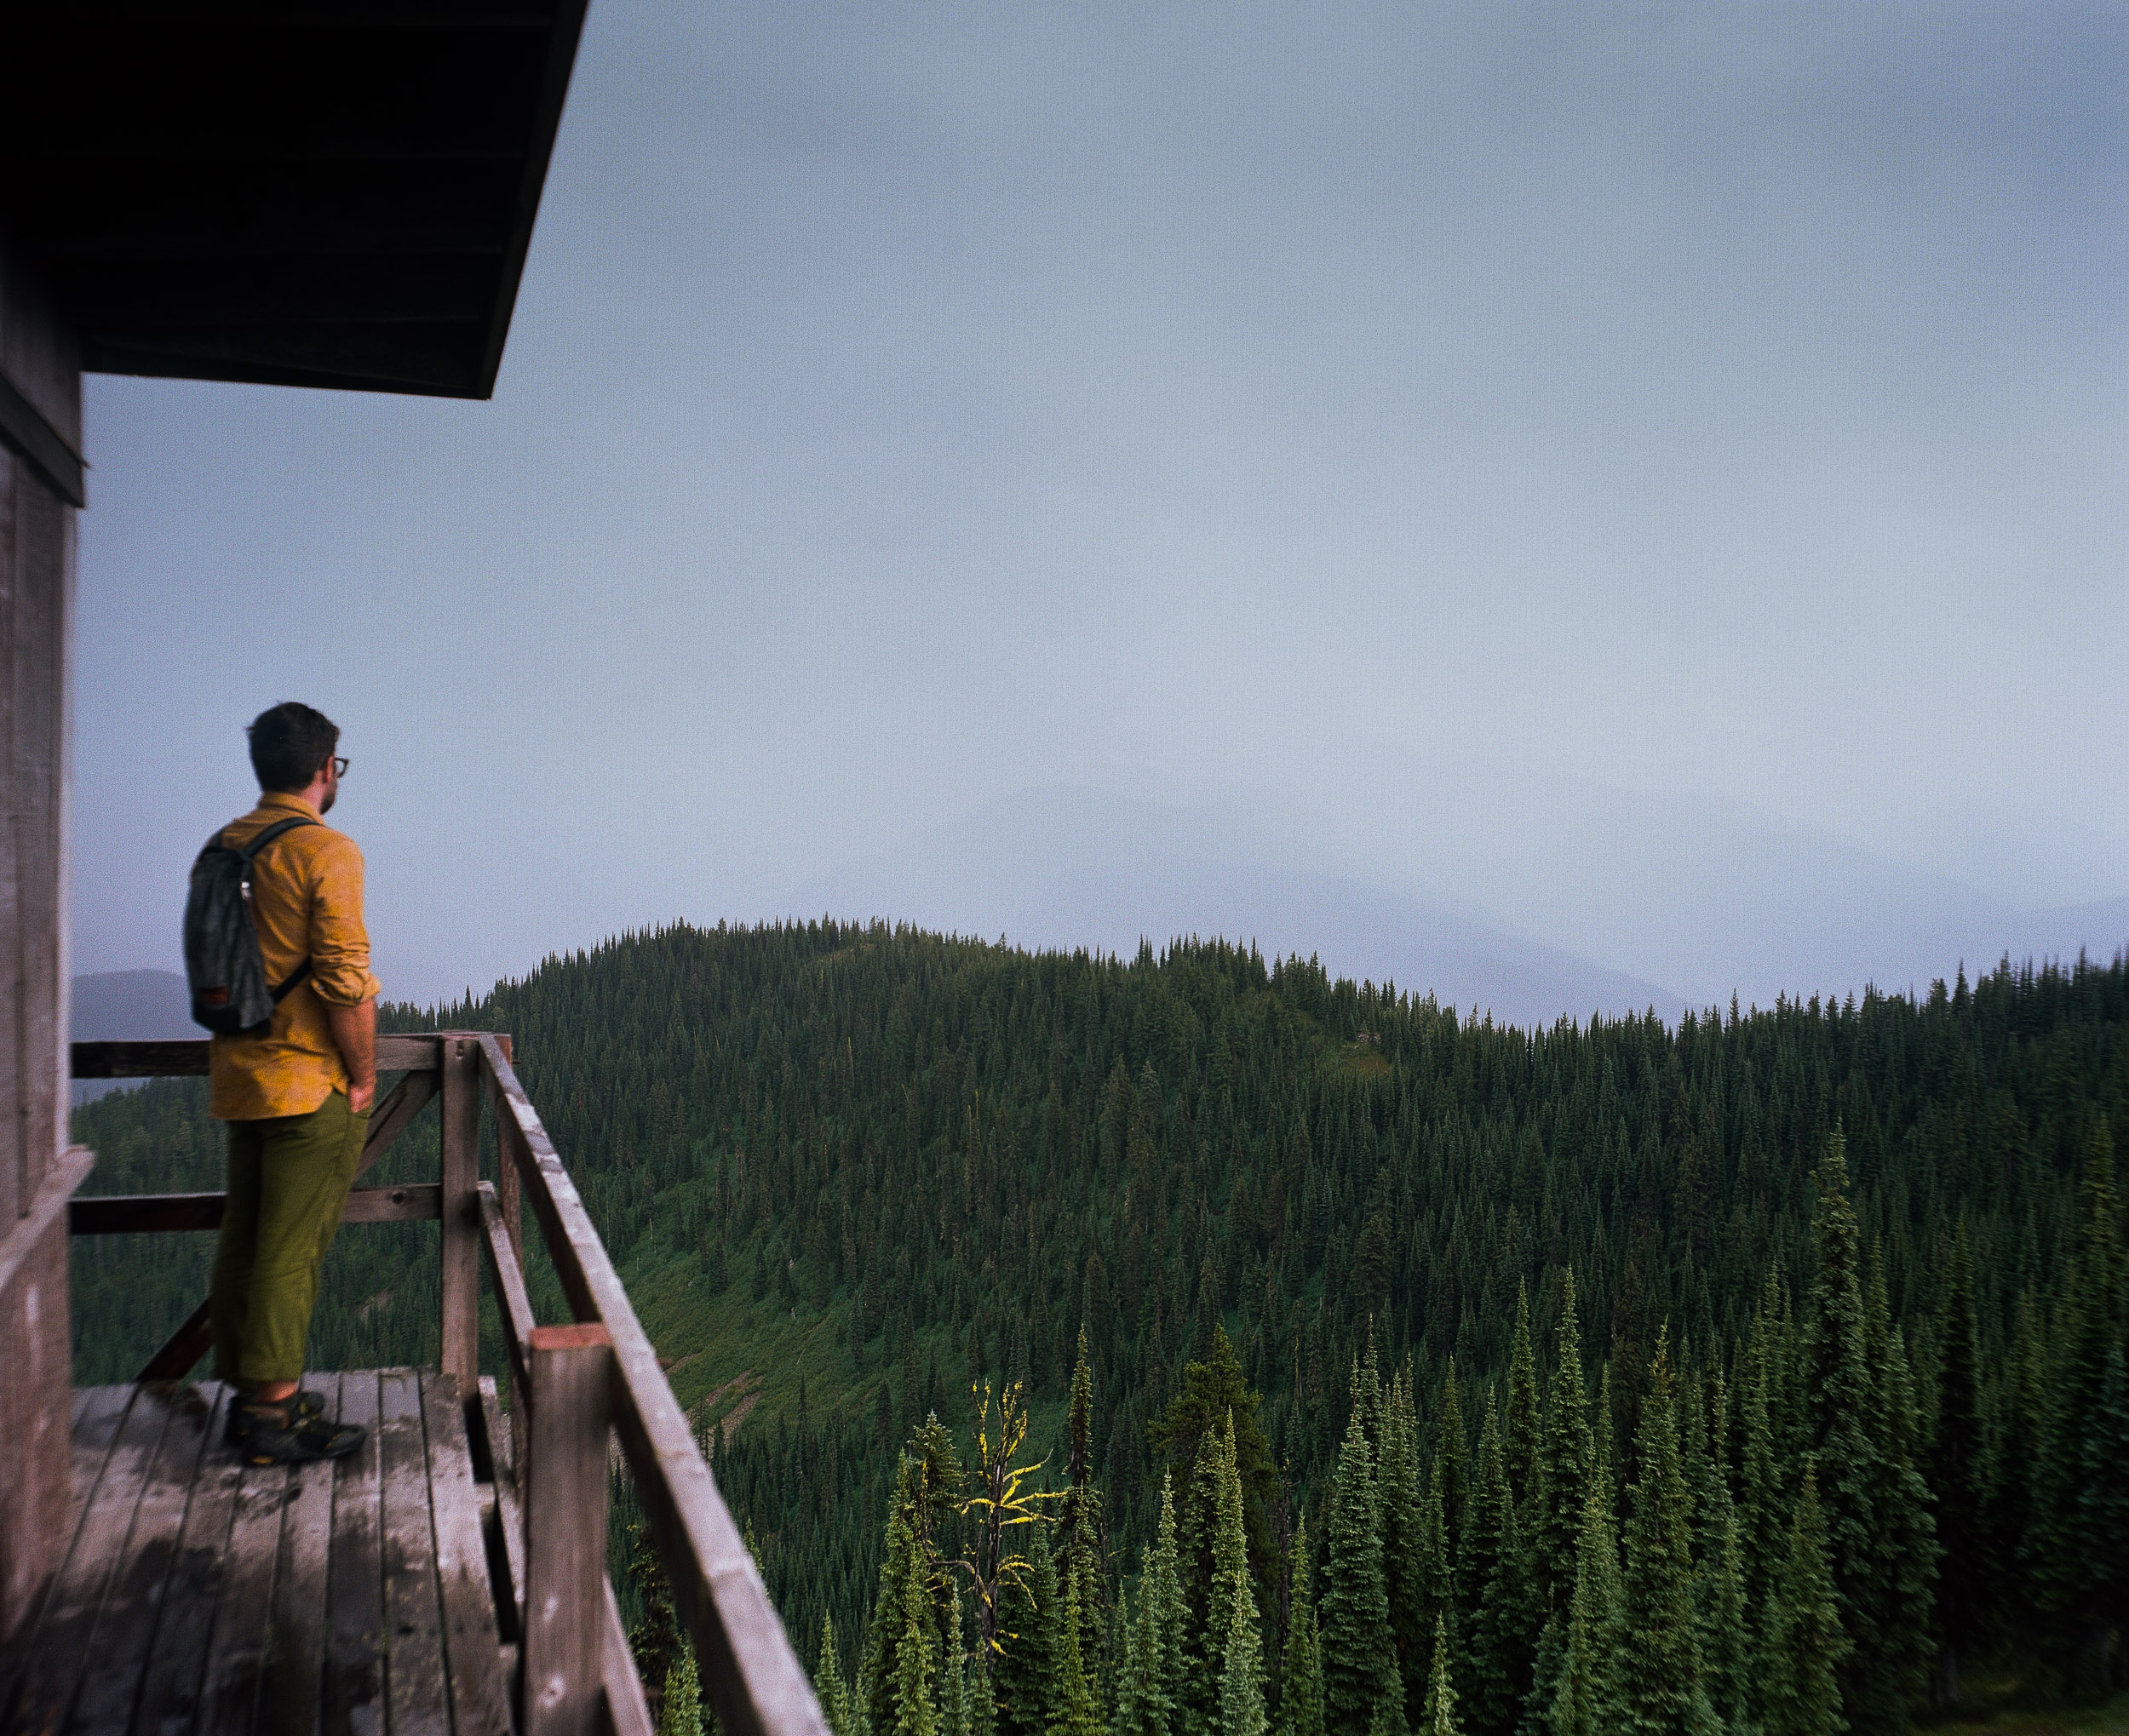 Hiker in Yellow shirt looking out over pine forest in Northern Montana